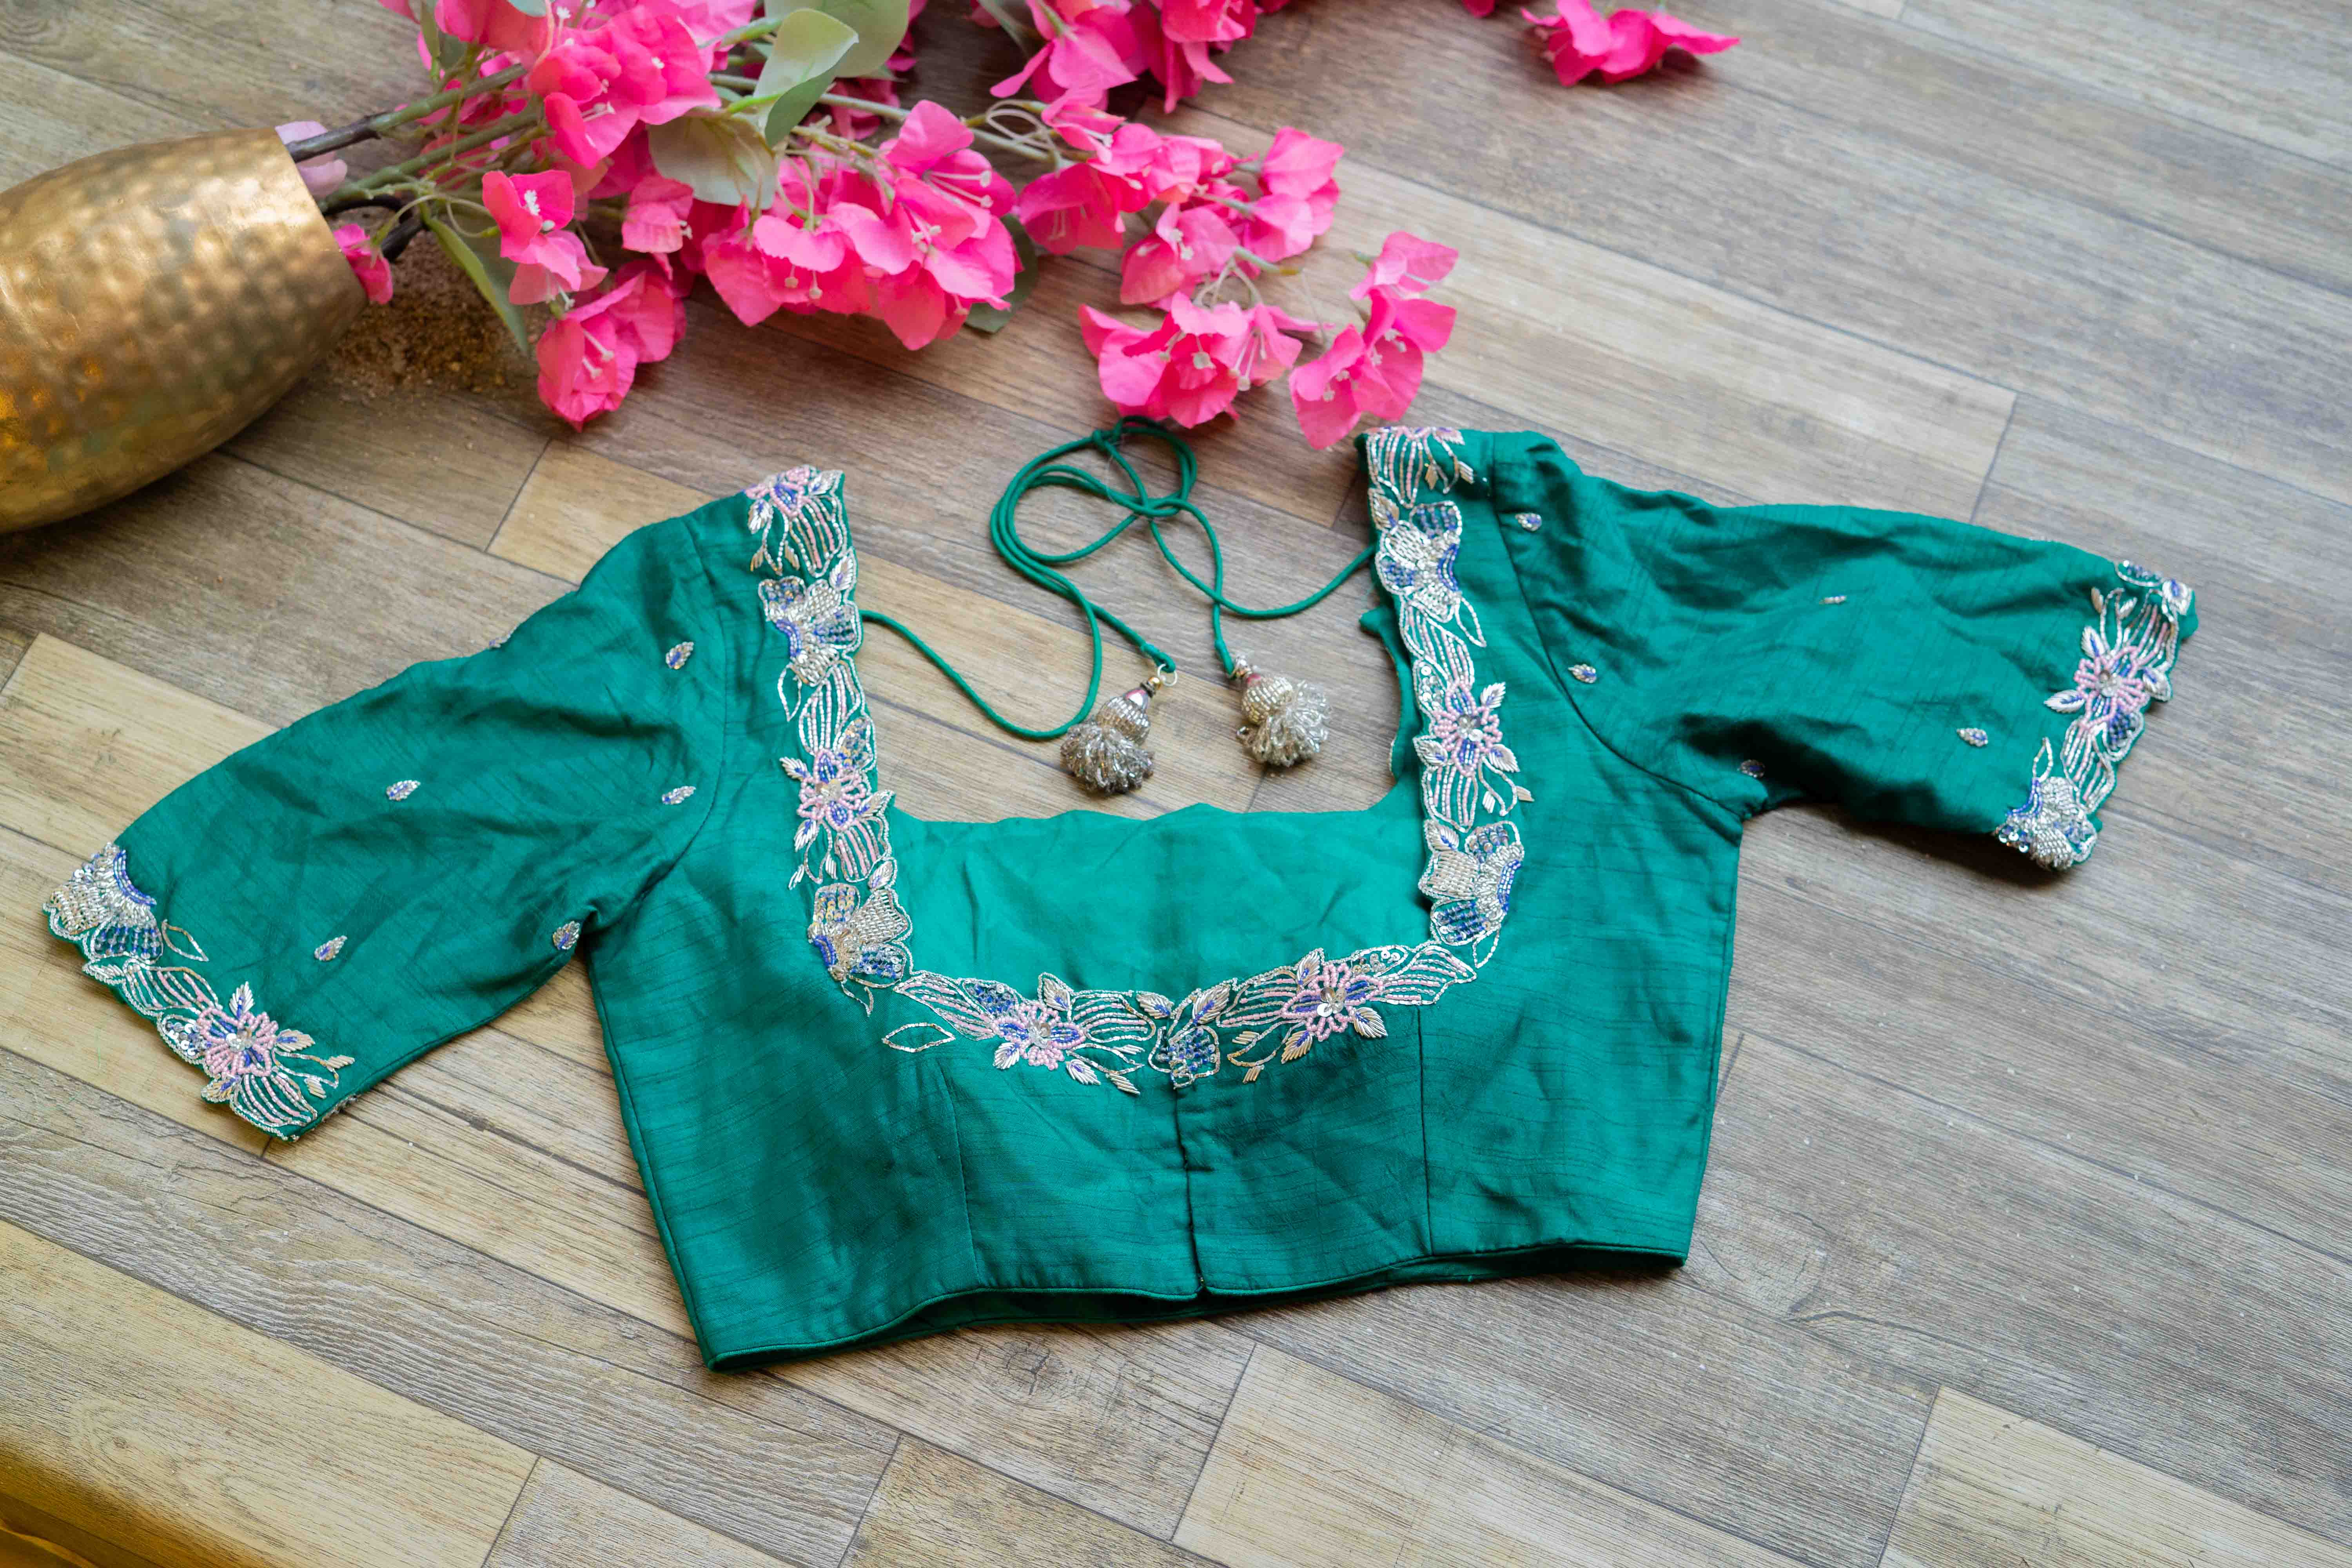 Teal blue embroidered blouse